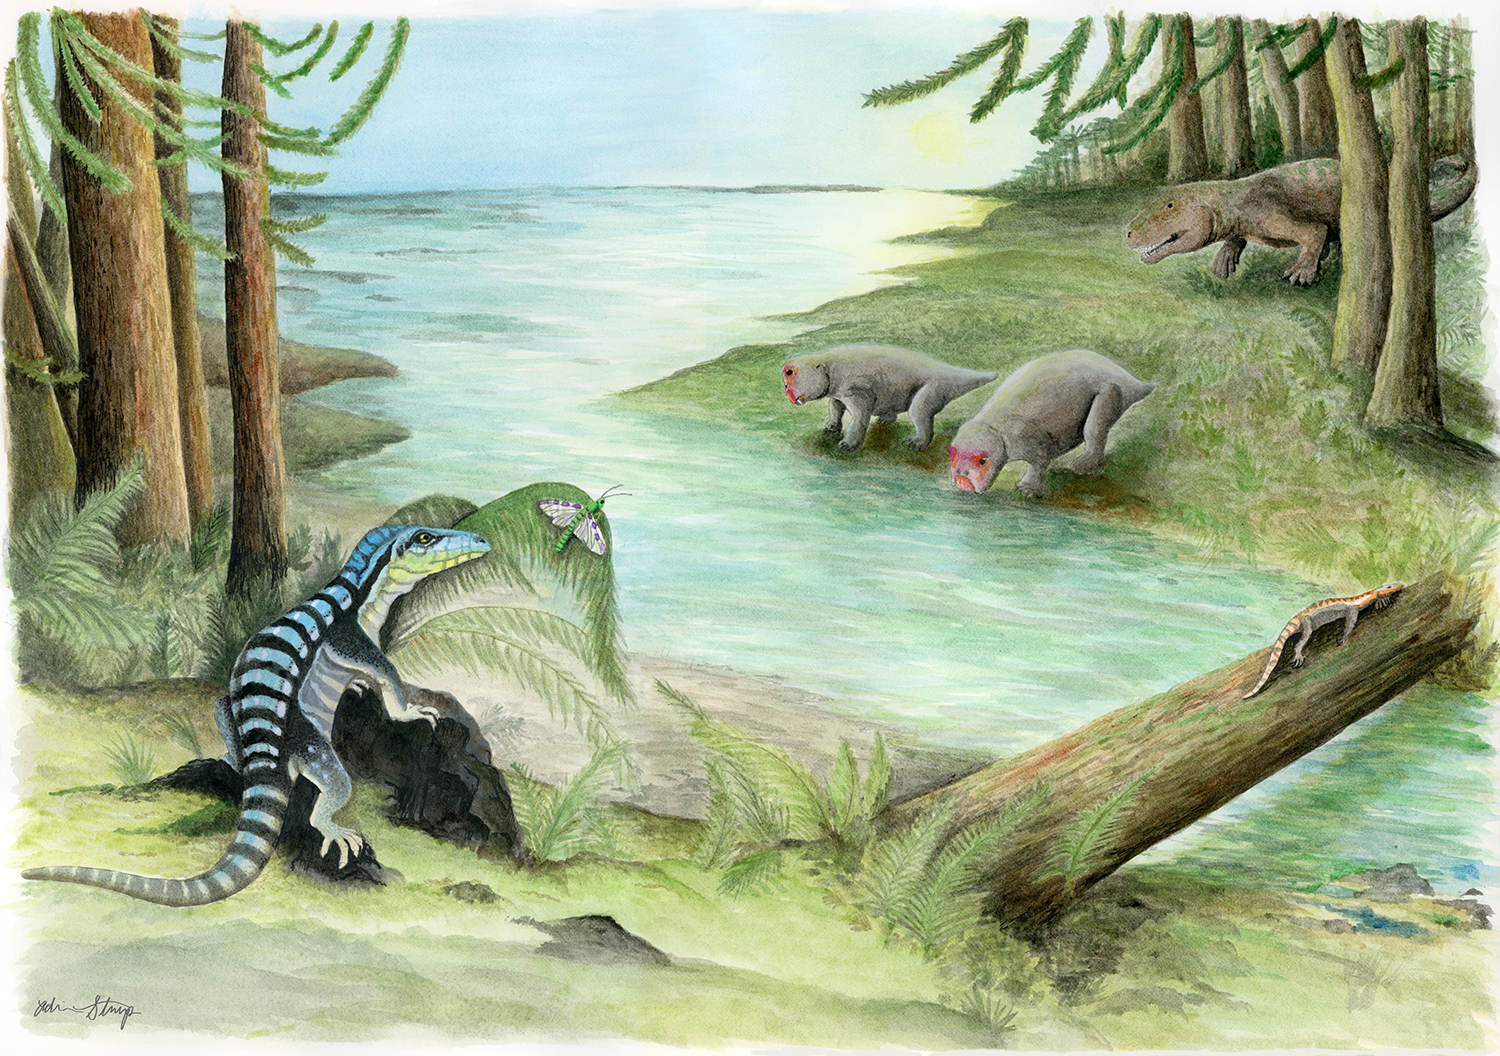 Antarctanax shackletoni stalks an insect on the bank of a river in Antarctica, during the Early Triassic.